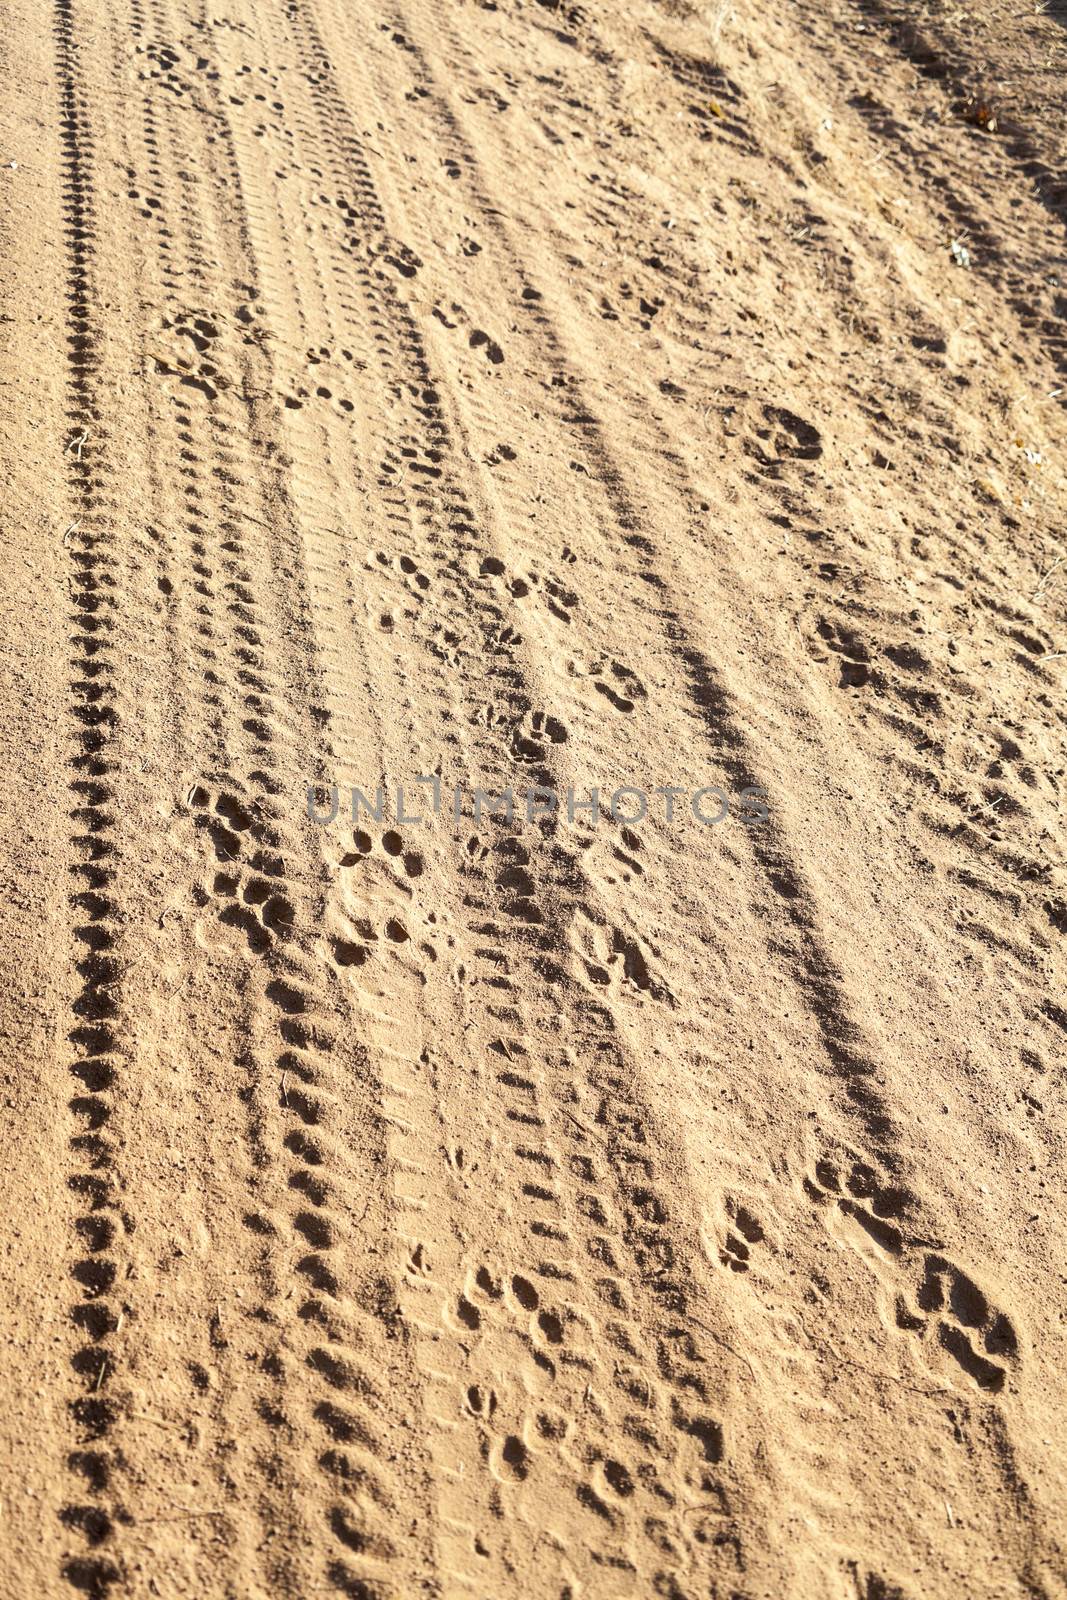 Tracks In The Sand by Imagecom